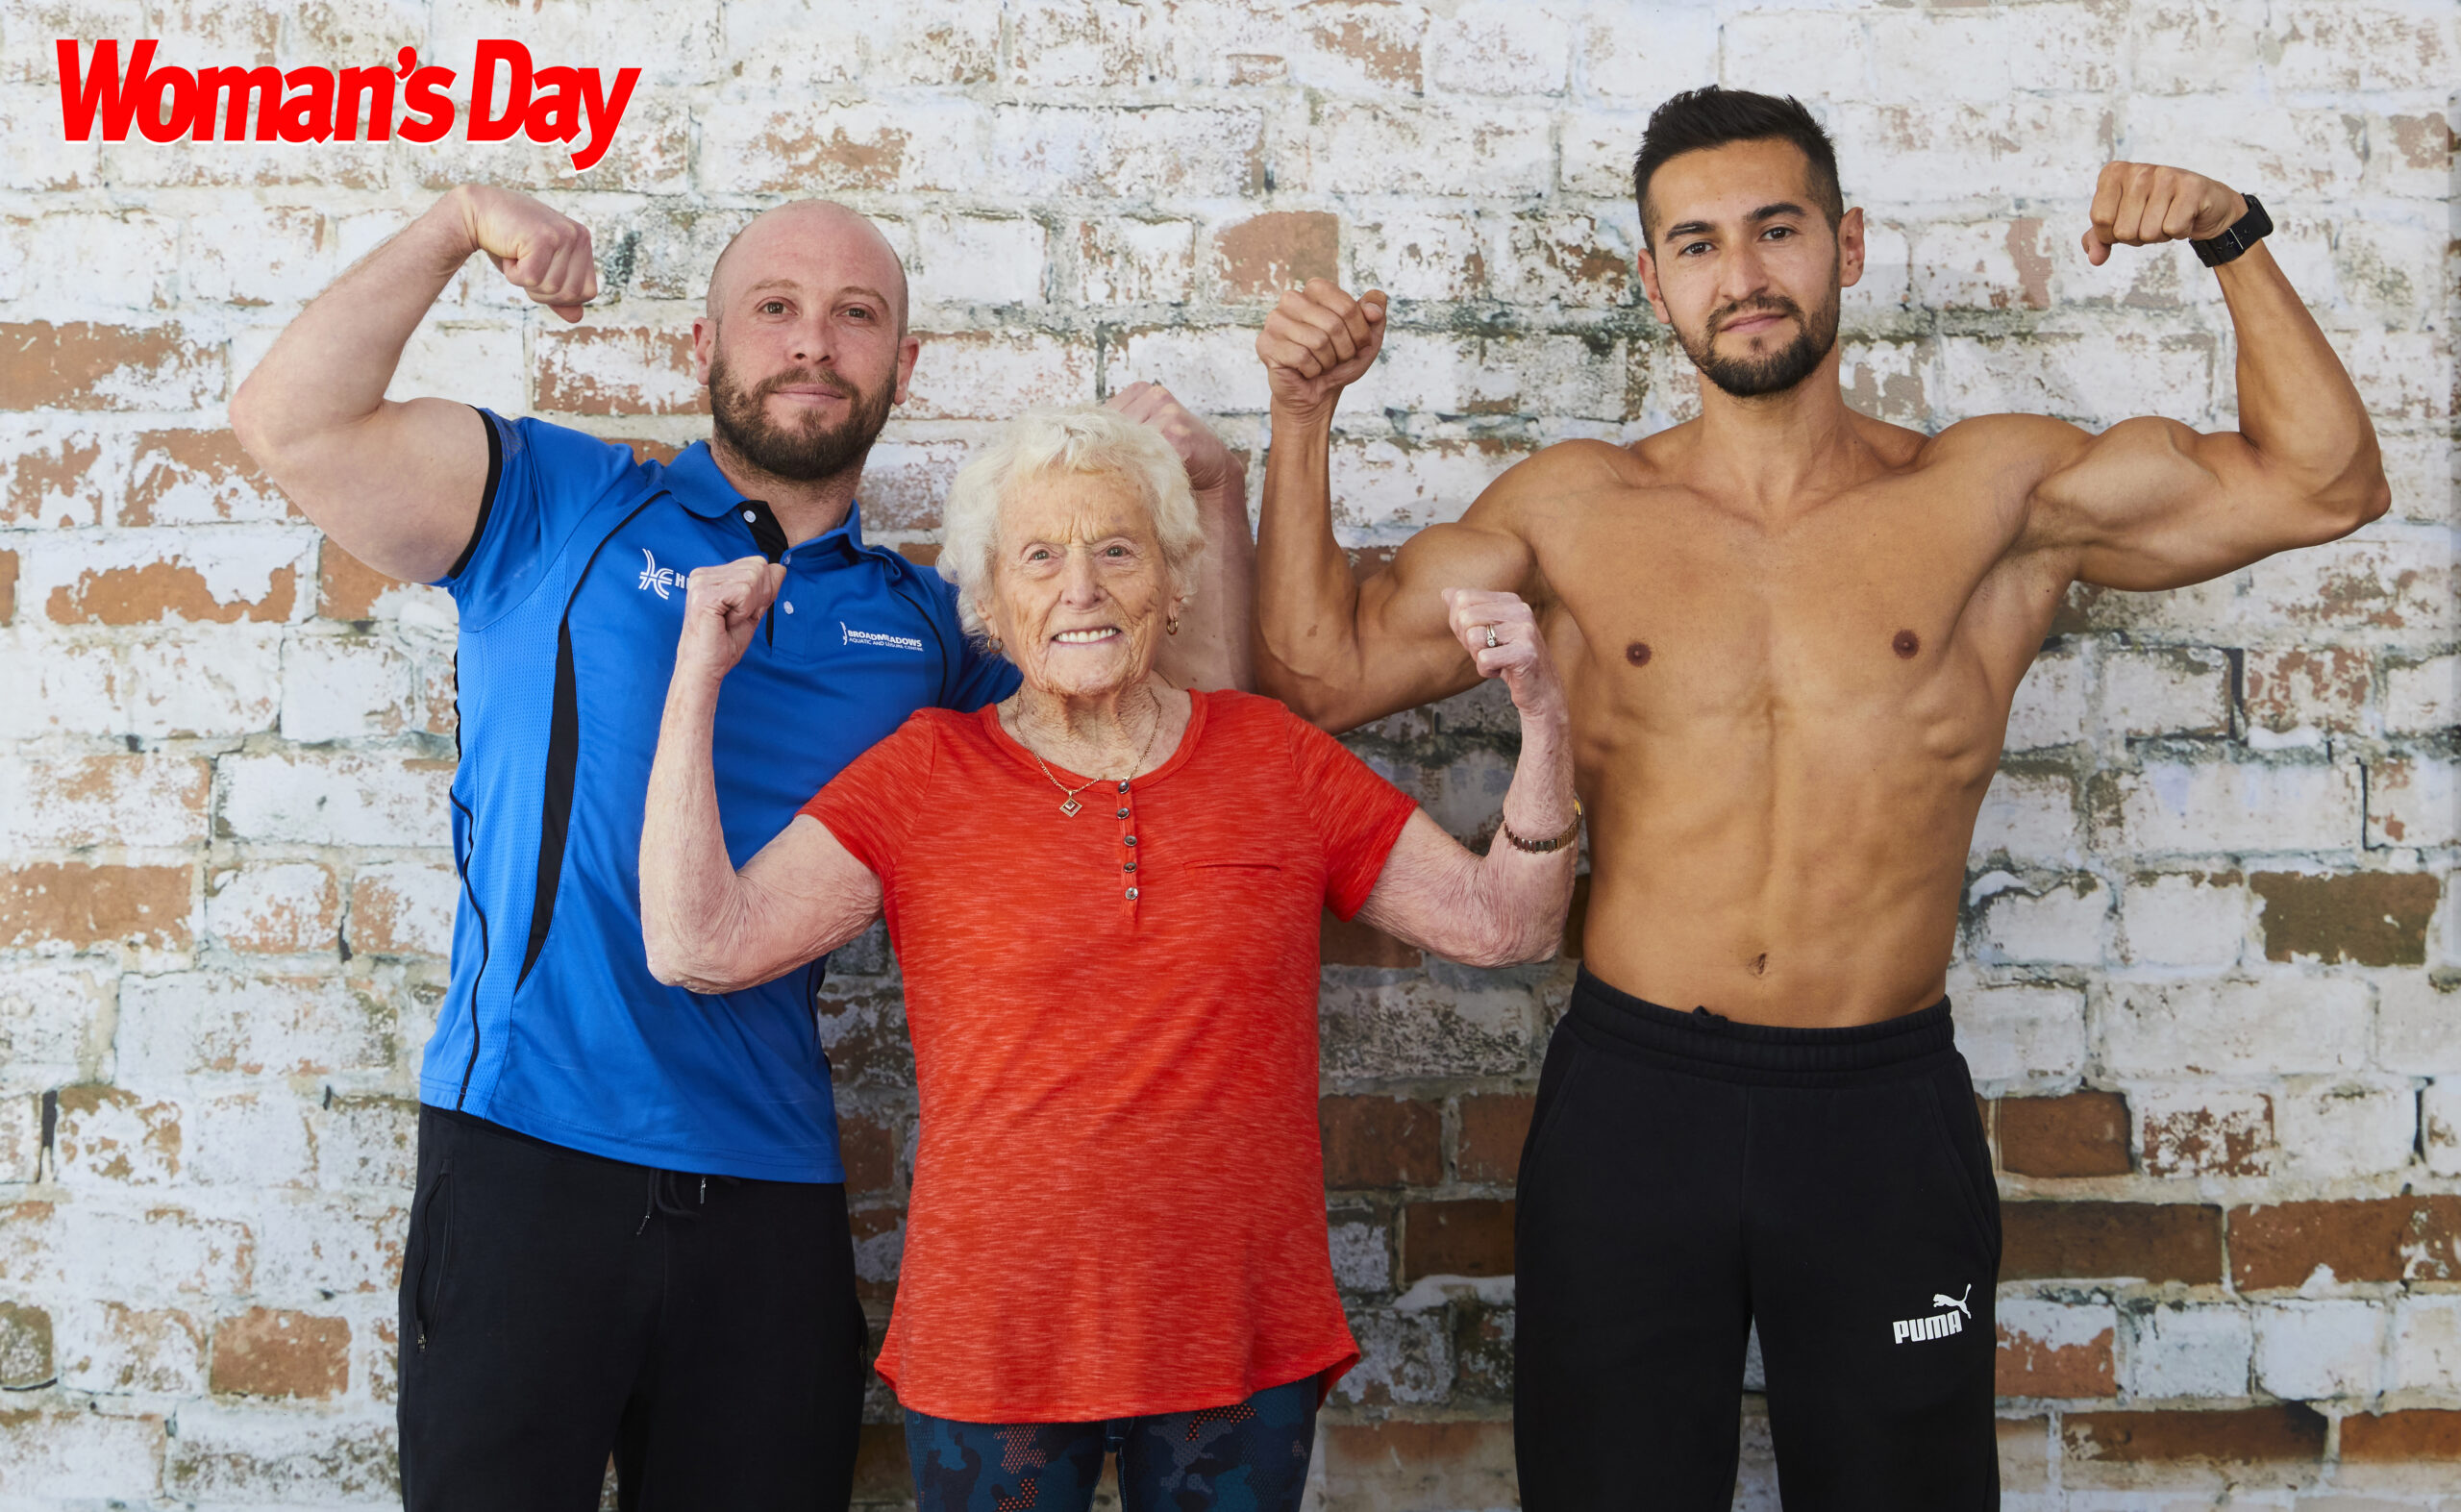 EXCLUSIVE: “I feel stronger and fitter than I ever have!”: Meet Edna, the 100-year-old gym junkie